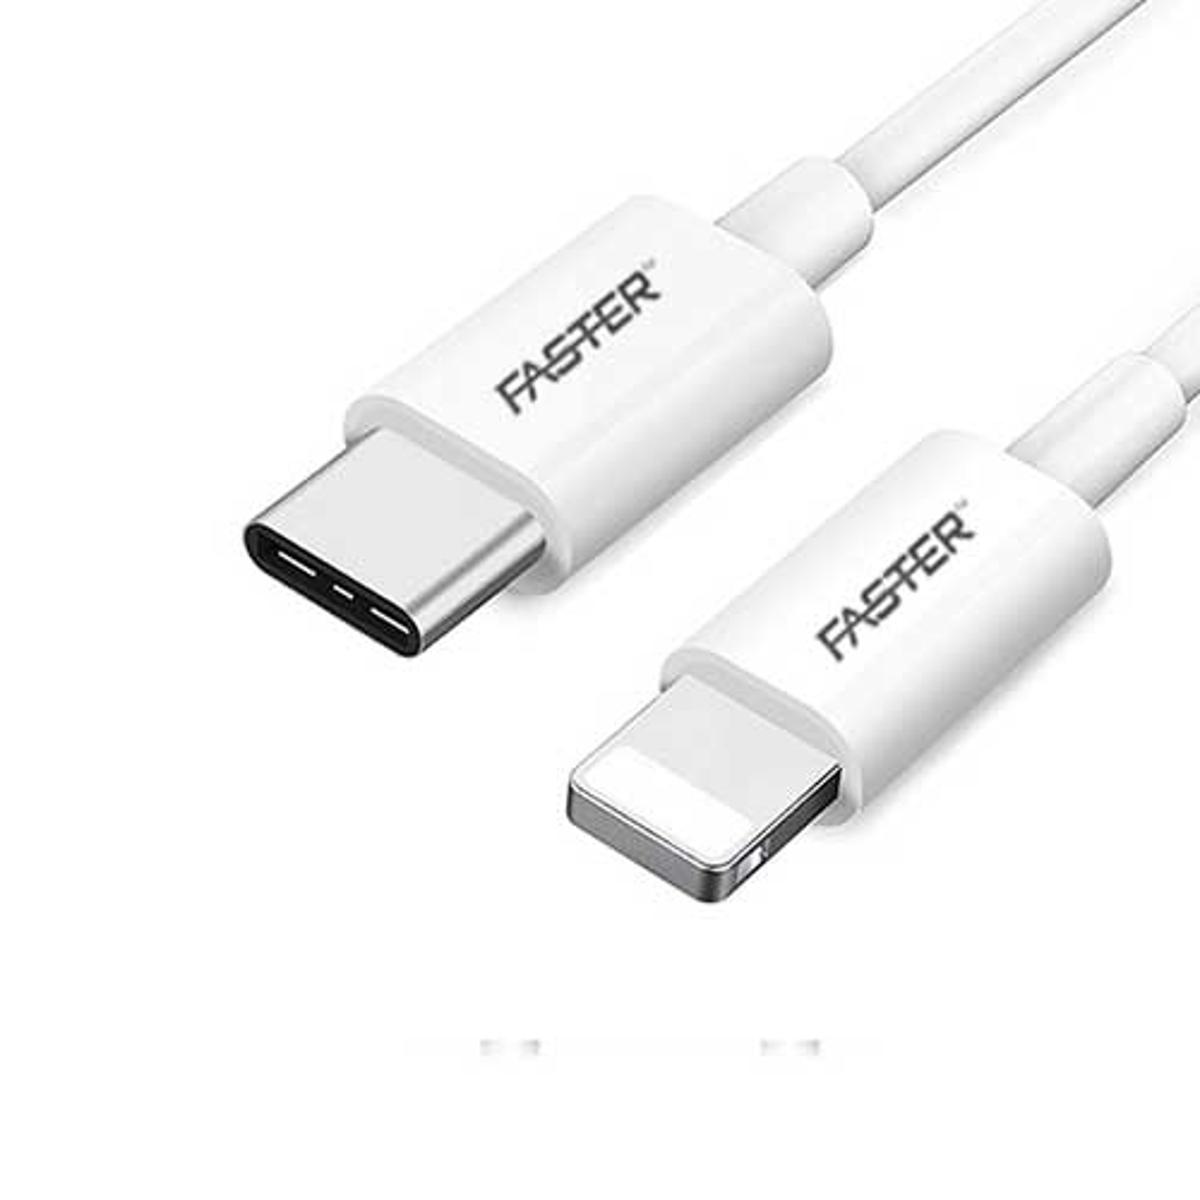 FASTER L1-PD Type-C to Lightning Fast Charging Cable for iPhone